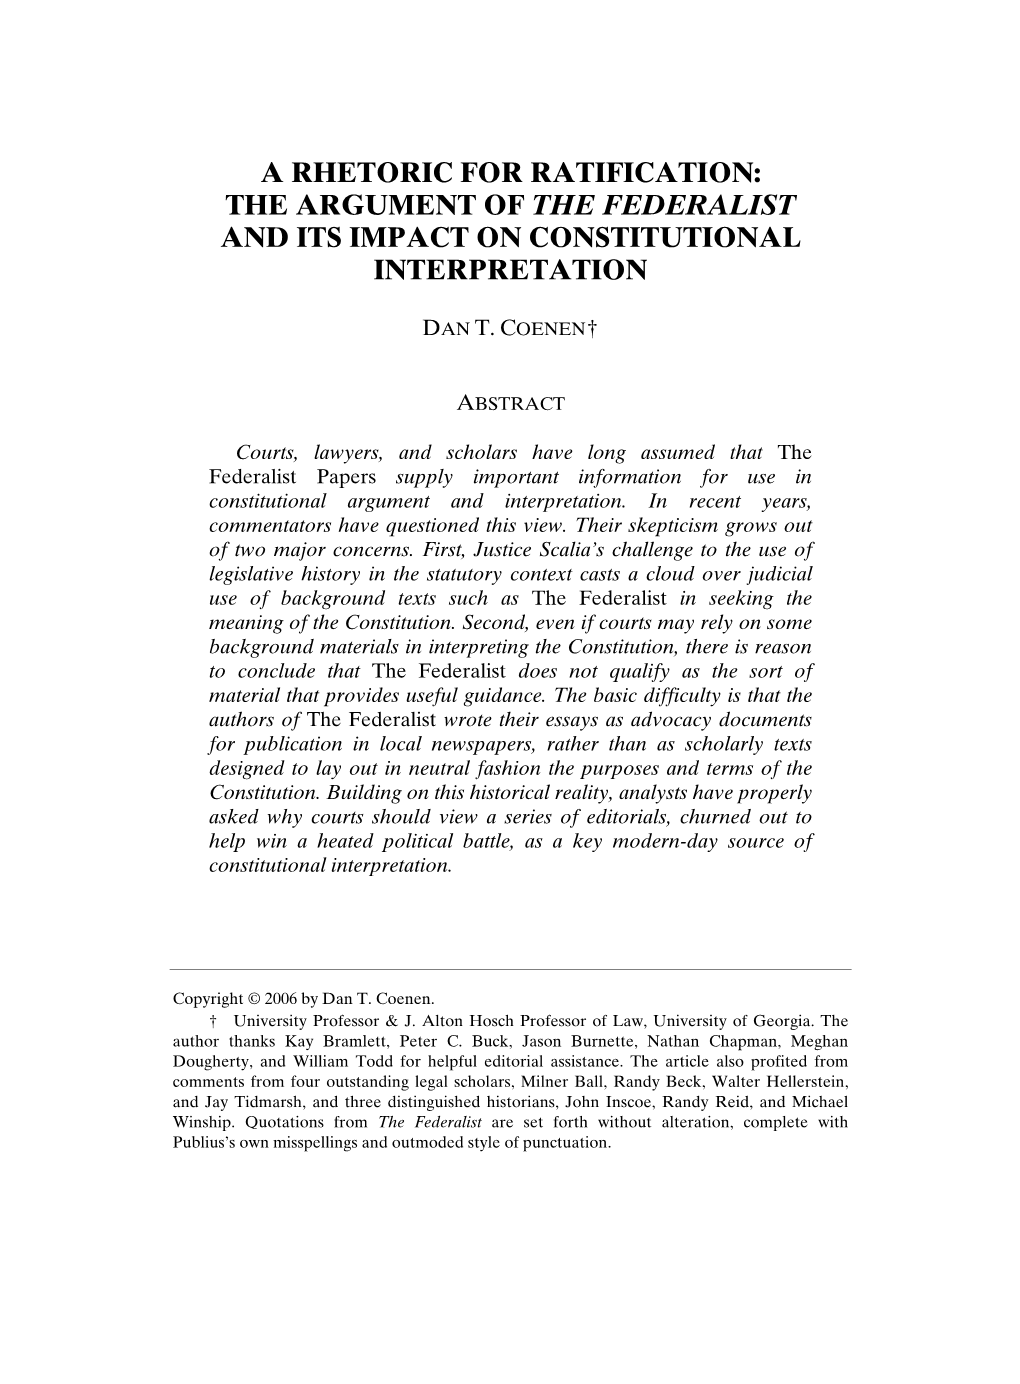 A Rhetoric for Ratification: the Argument of the Federalist and Its Impact on Constitutional Interpretation